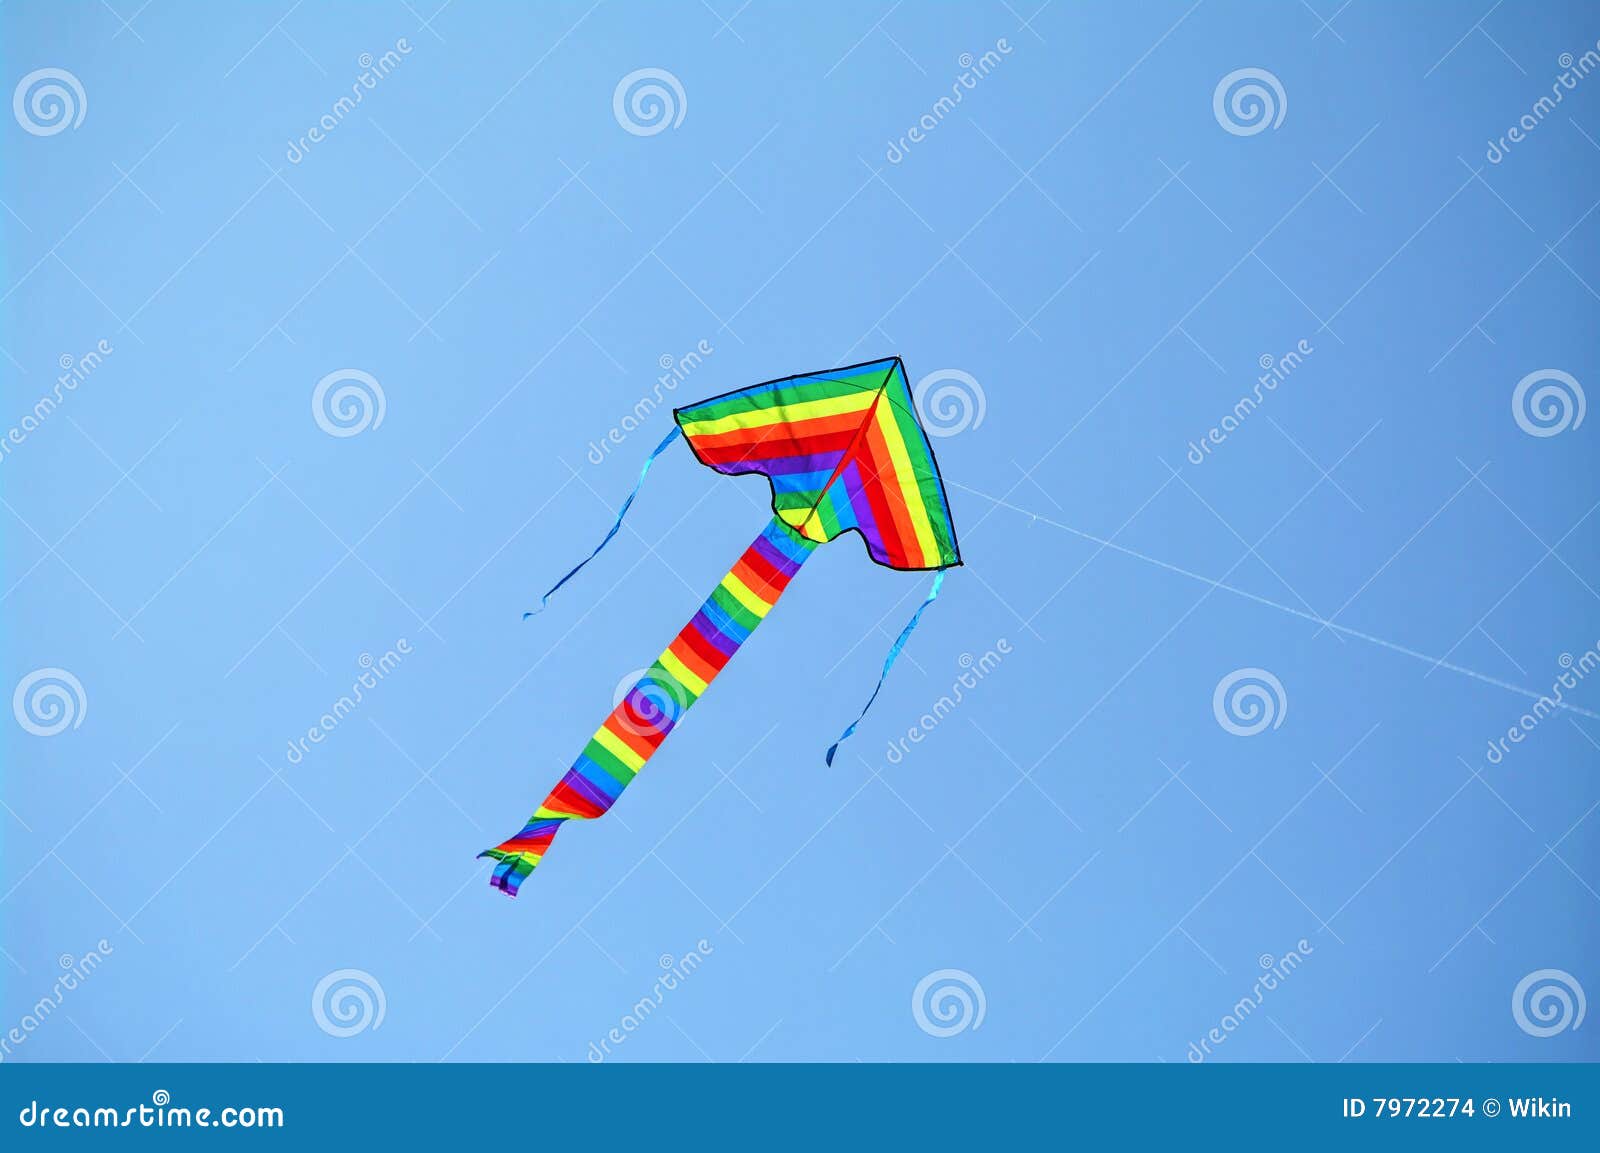 a colorful kite